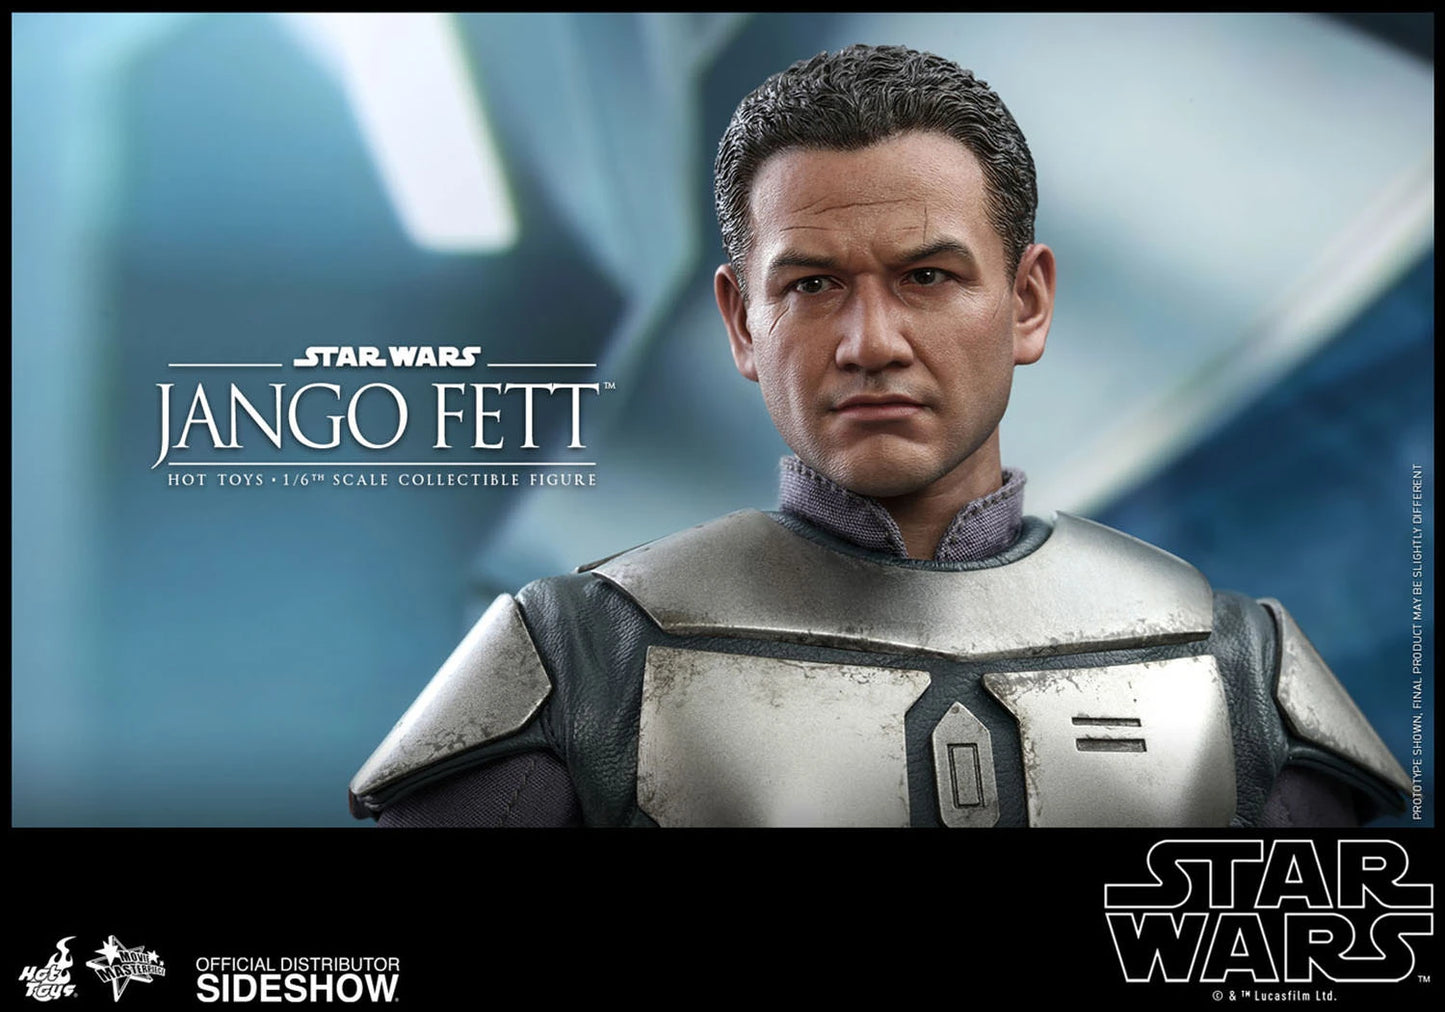 SIDESHOW STAR WARS EPISODE II ATTACK OF THE CLONES JANGO FETT 1/6 SCALE - 2149 - Anotoys Collectibles